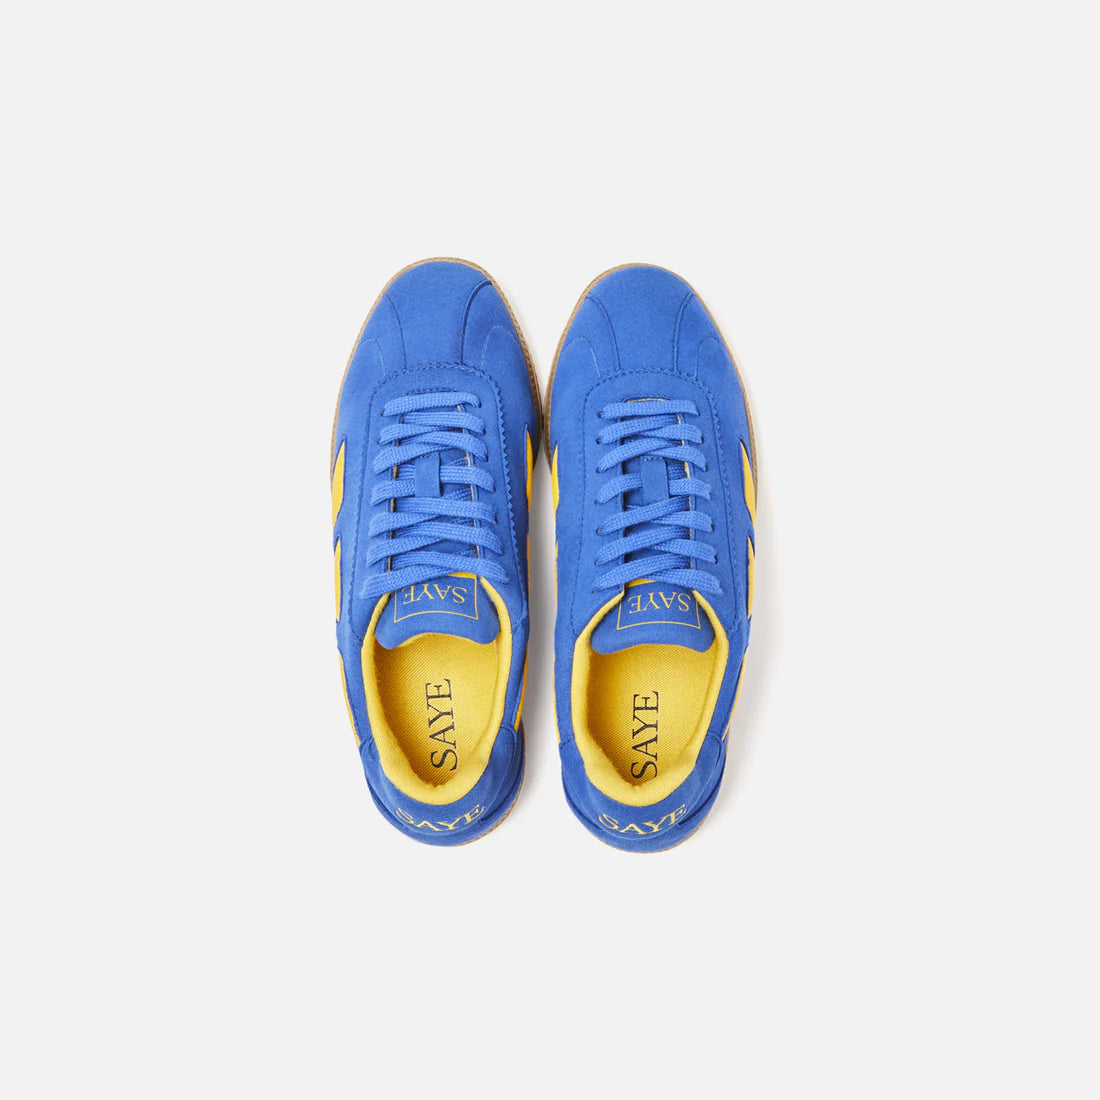 Blue suede sneakers with yellow side detail